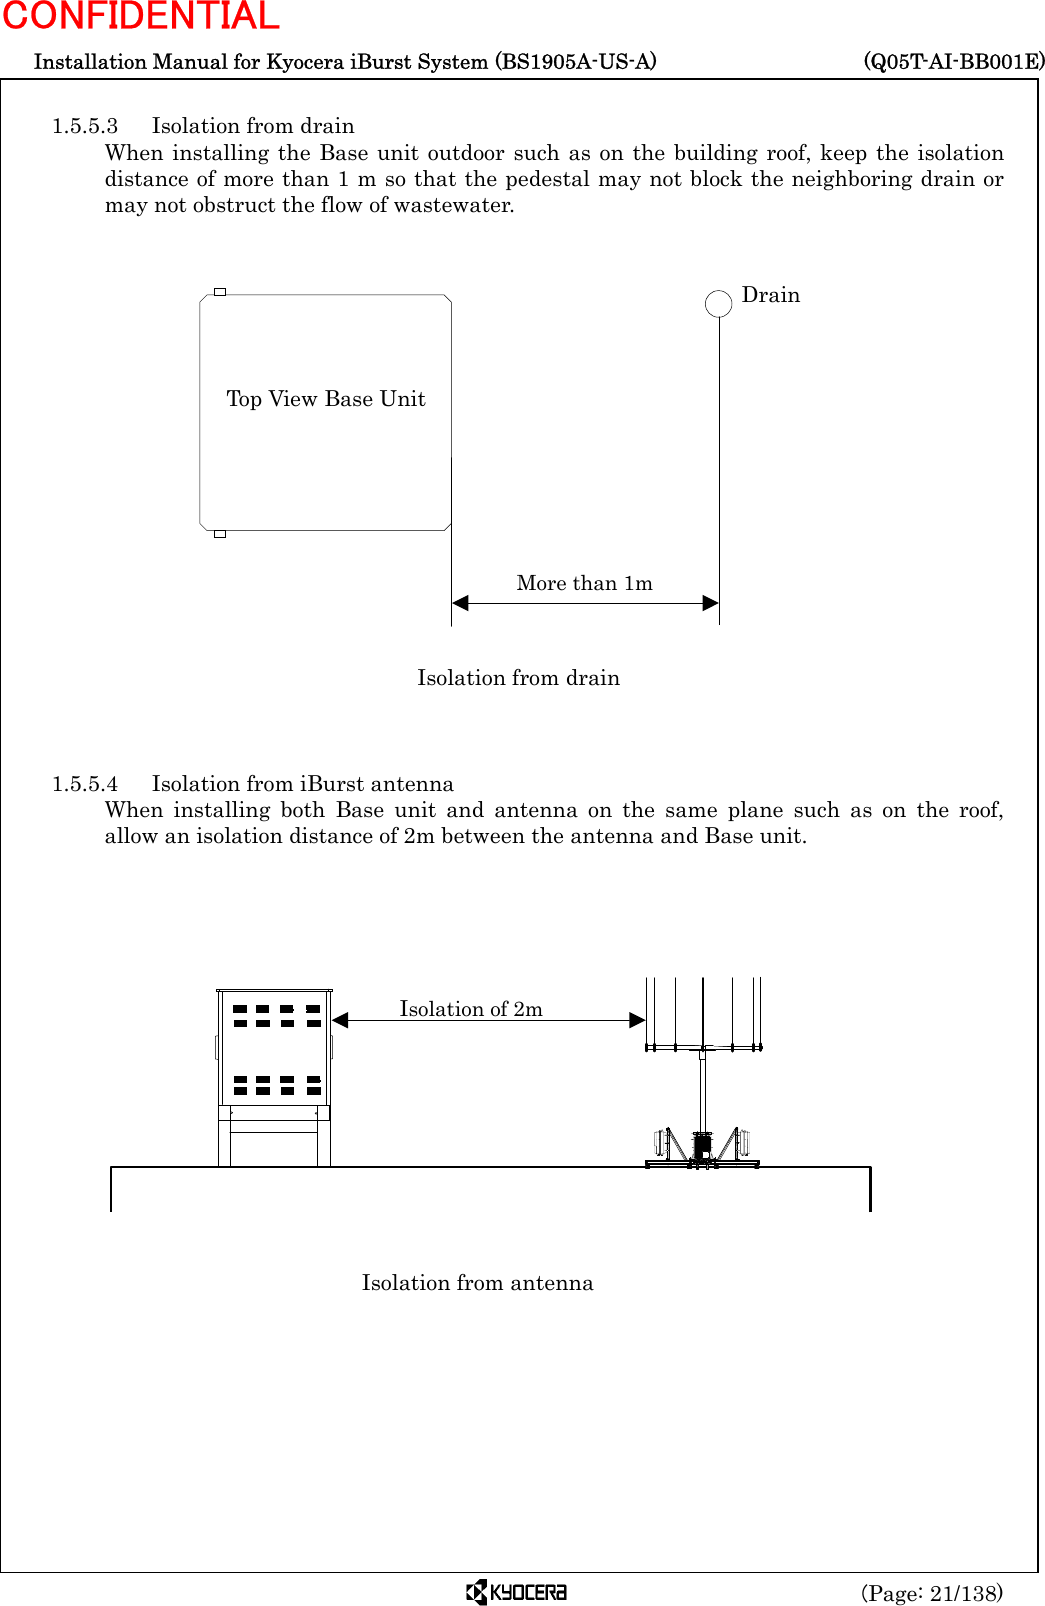  Installation Manual for Kyocera iBurst System (BS1905A-US-A)     (Q05T-AI-BB001E) (Page: 21/138) CONFIDENTIAL  1.5.5.3  Isolation from drain When installing the Base unit outdoor such as on the building roof, keep the isolation distance of more than 1 m so that the pedestal may not block the neighboring drain or may not obstruct the flow of wastewater.                  Isolation from drain    1.5.5.4  Isolation from iBurst antenna When installing both Base unit and antenna on the same plane such as on the roof, allow an isolation distance of 2m between the antenna and Base unit.                 Isolation from antenna     Top View Base Unit Drain More than 1m Isolation of 2m  